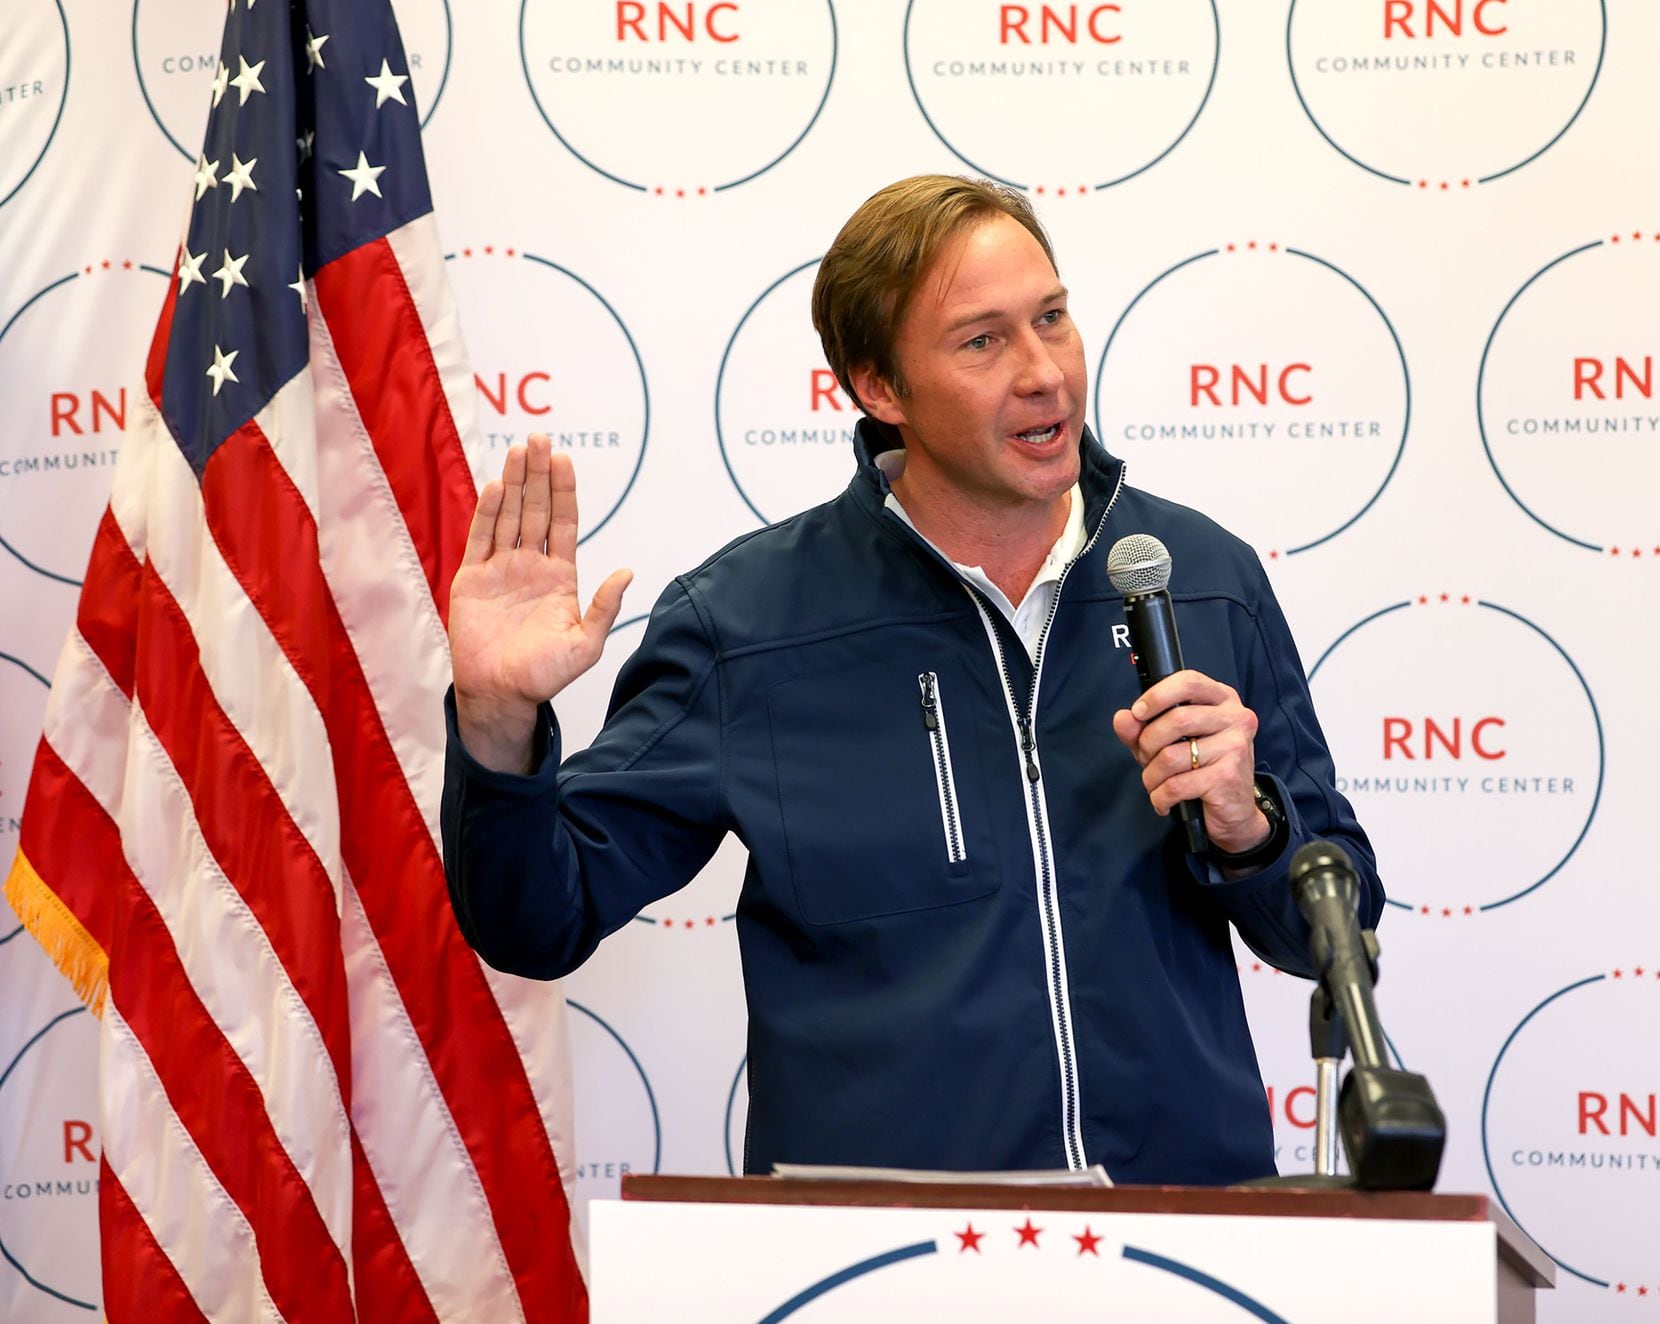 The Republican National Committee opens a community center in the Dallas area.  Tommy Hicks...